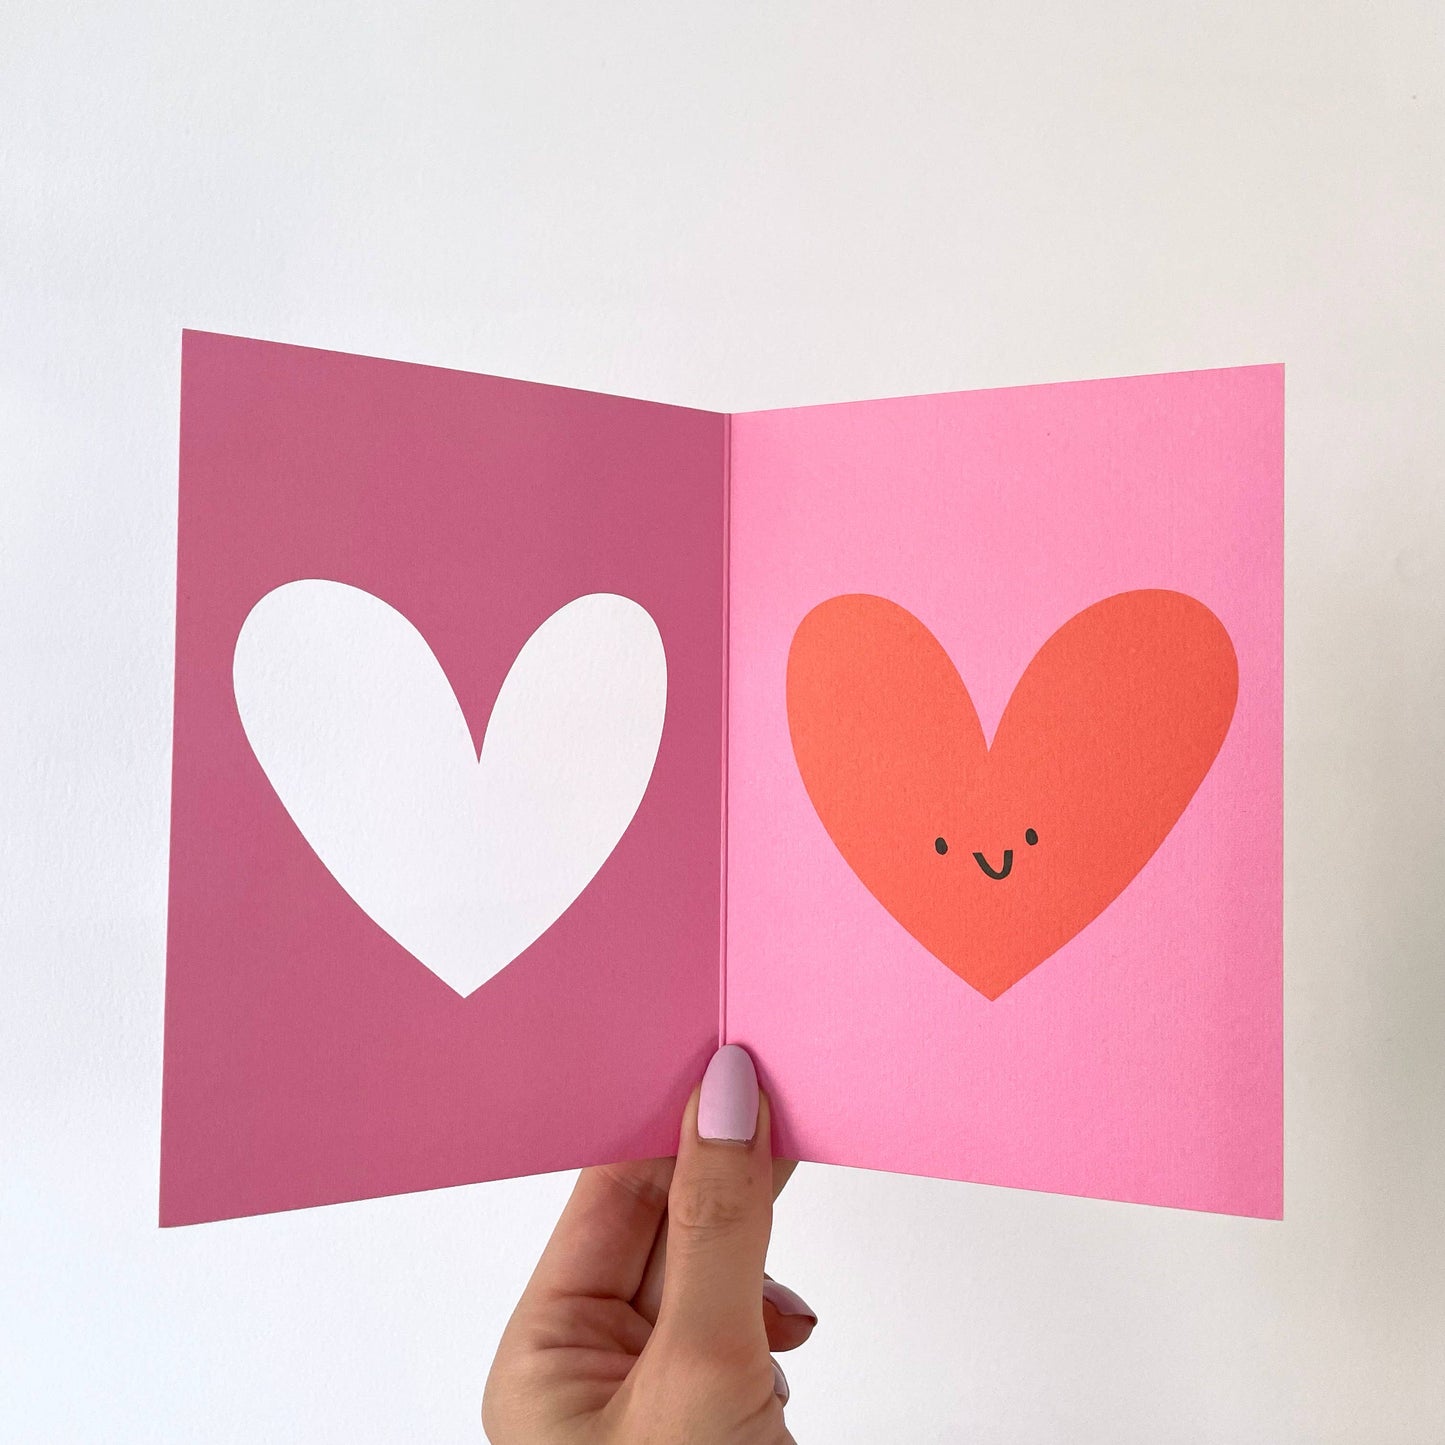 Rumble Cards - Love Heart - Die Cut Cards - Valentines Day - Anniversary